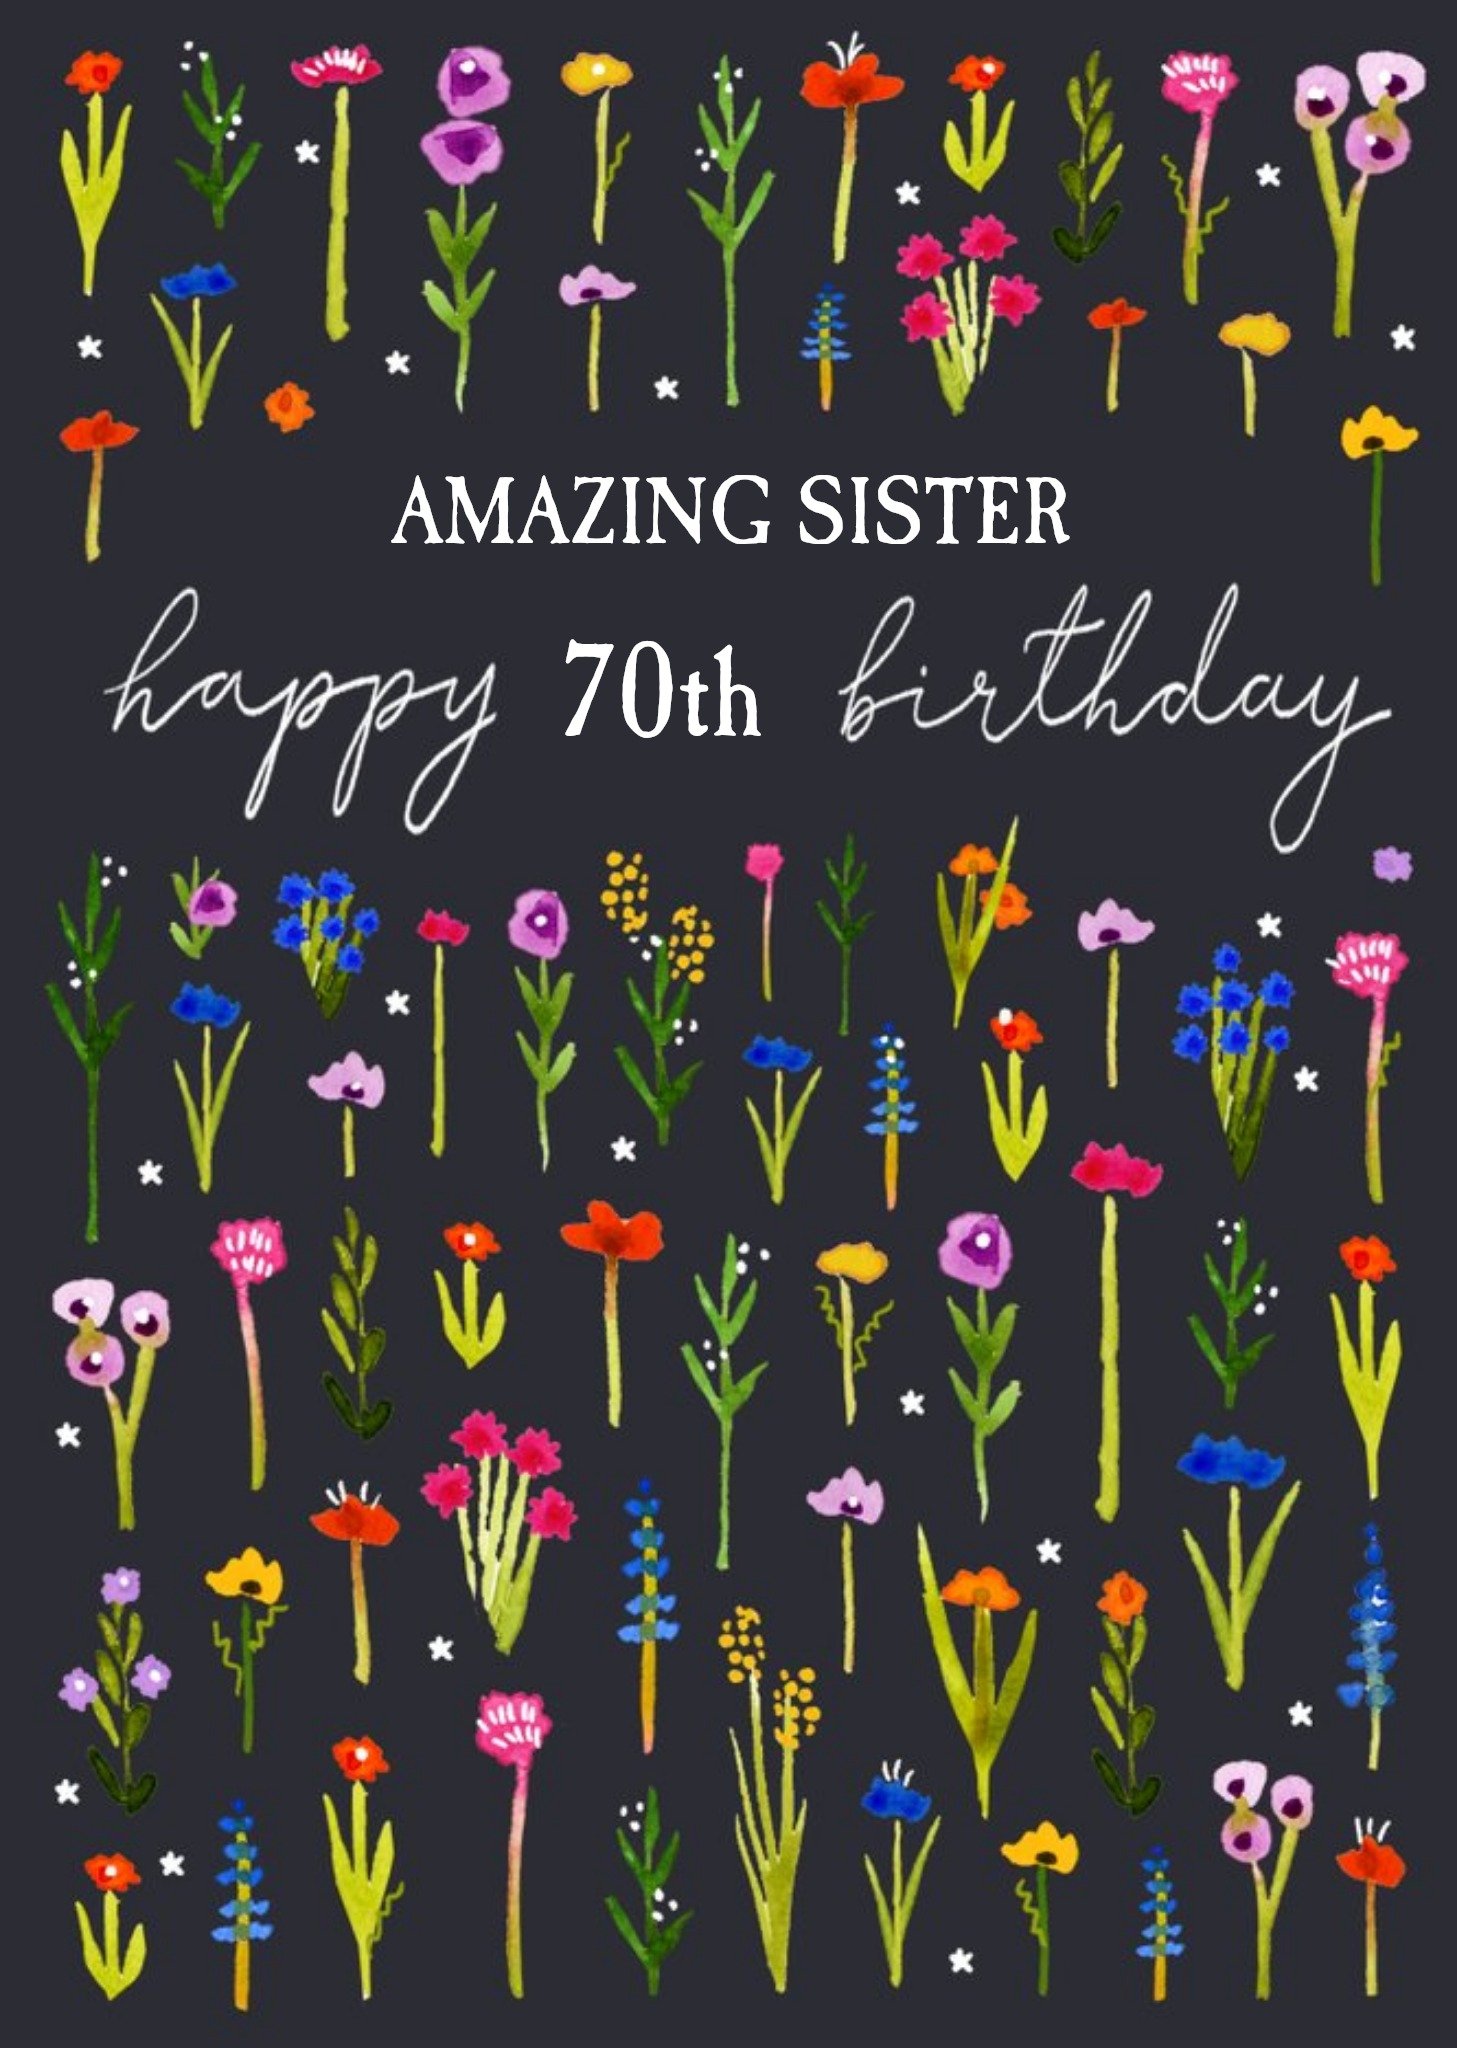 Moonpig Amazing Sister Illustrated Floral Pattern 70th Birthday Card By Okey Dokey Design, Large